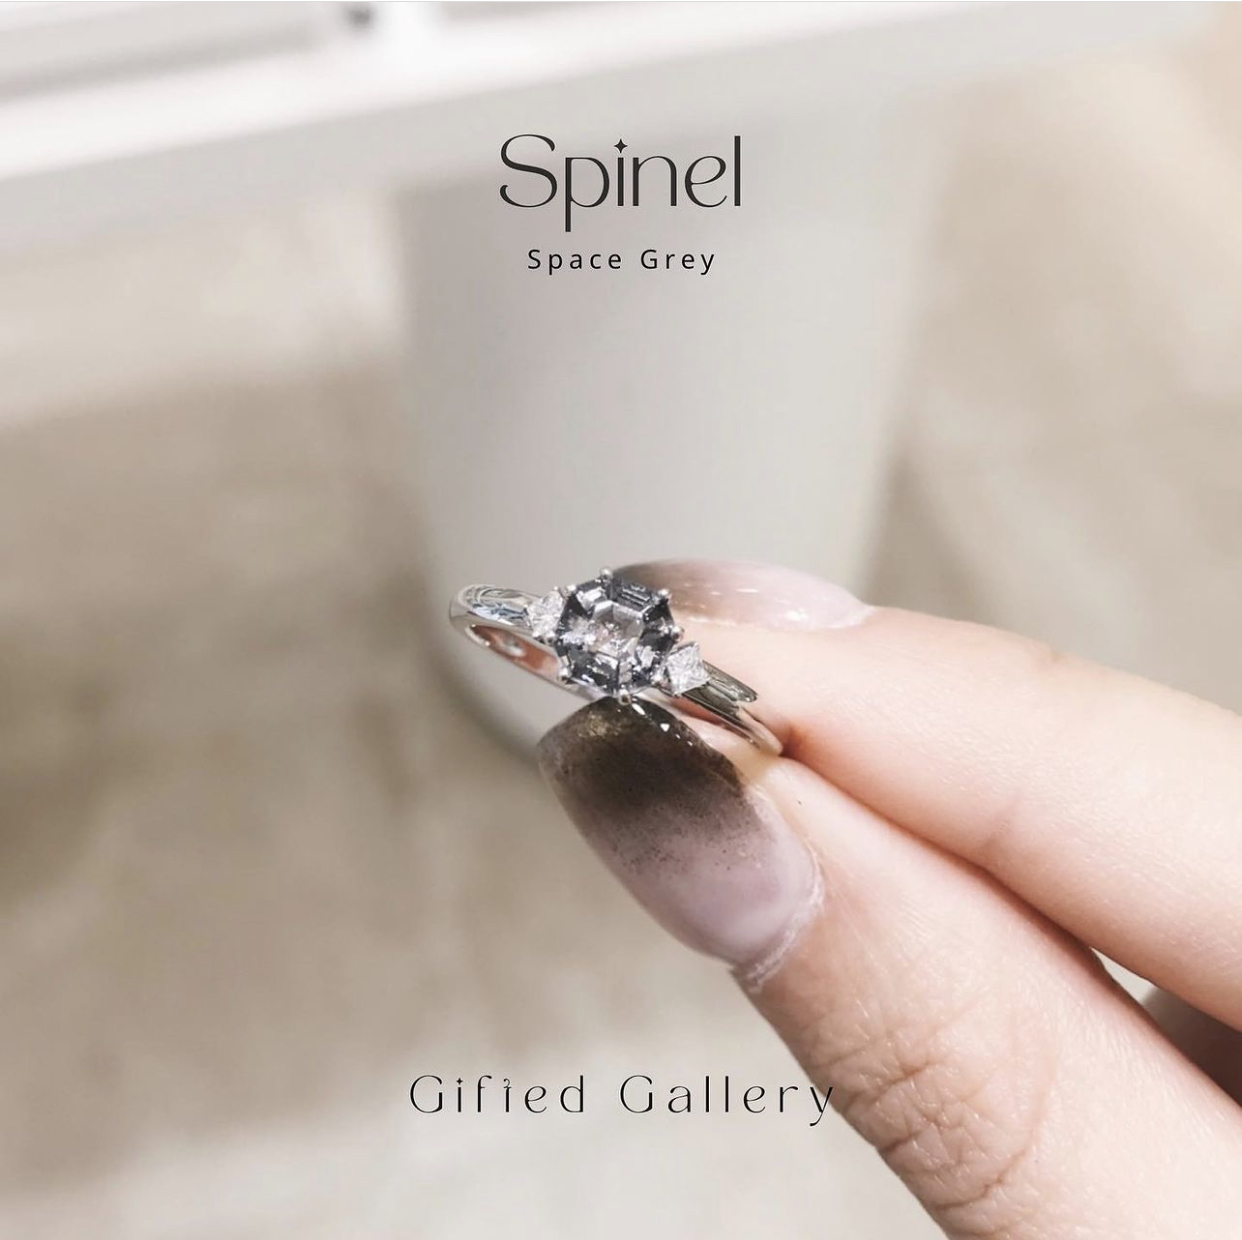 Space Grey Spinel Ring By Gifted Gallery